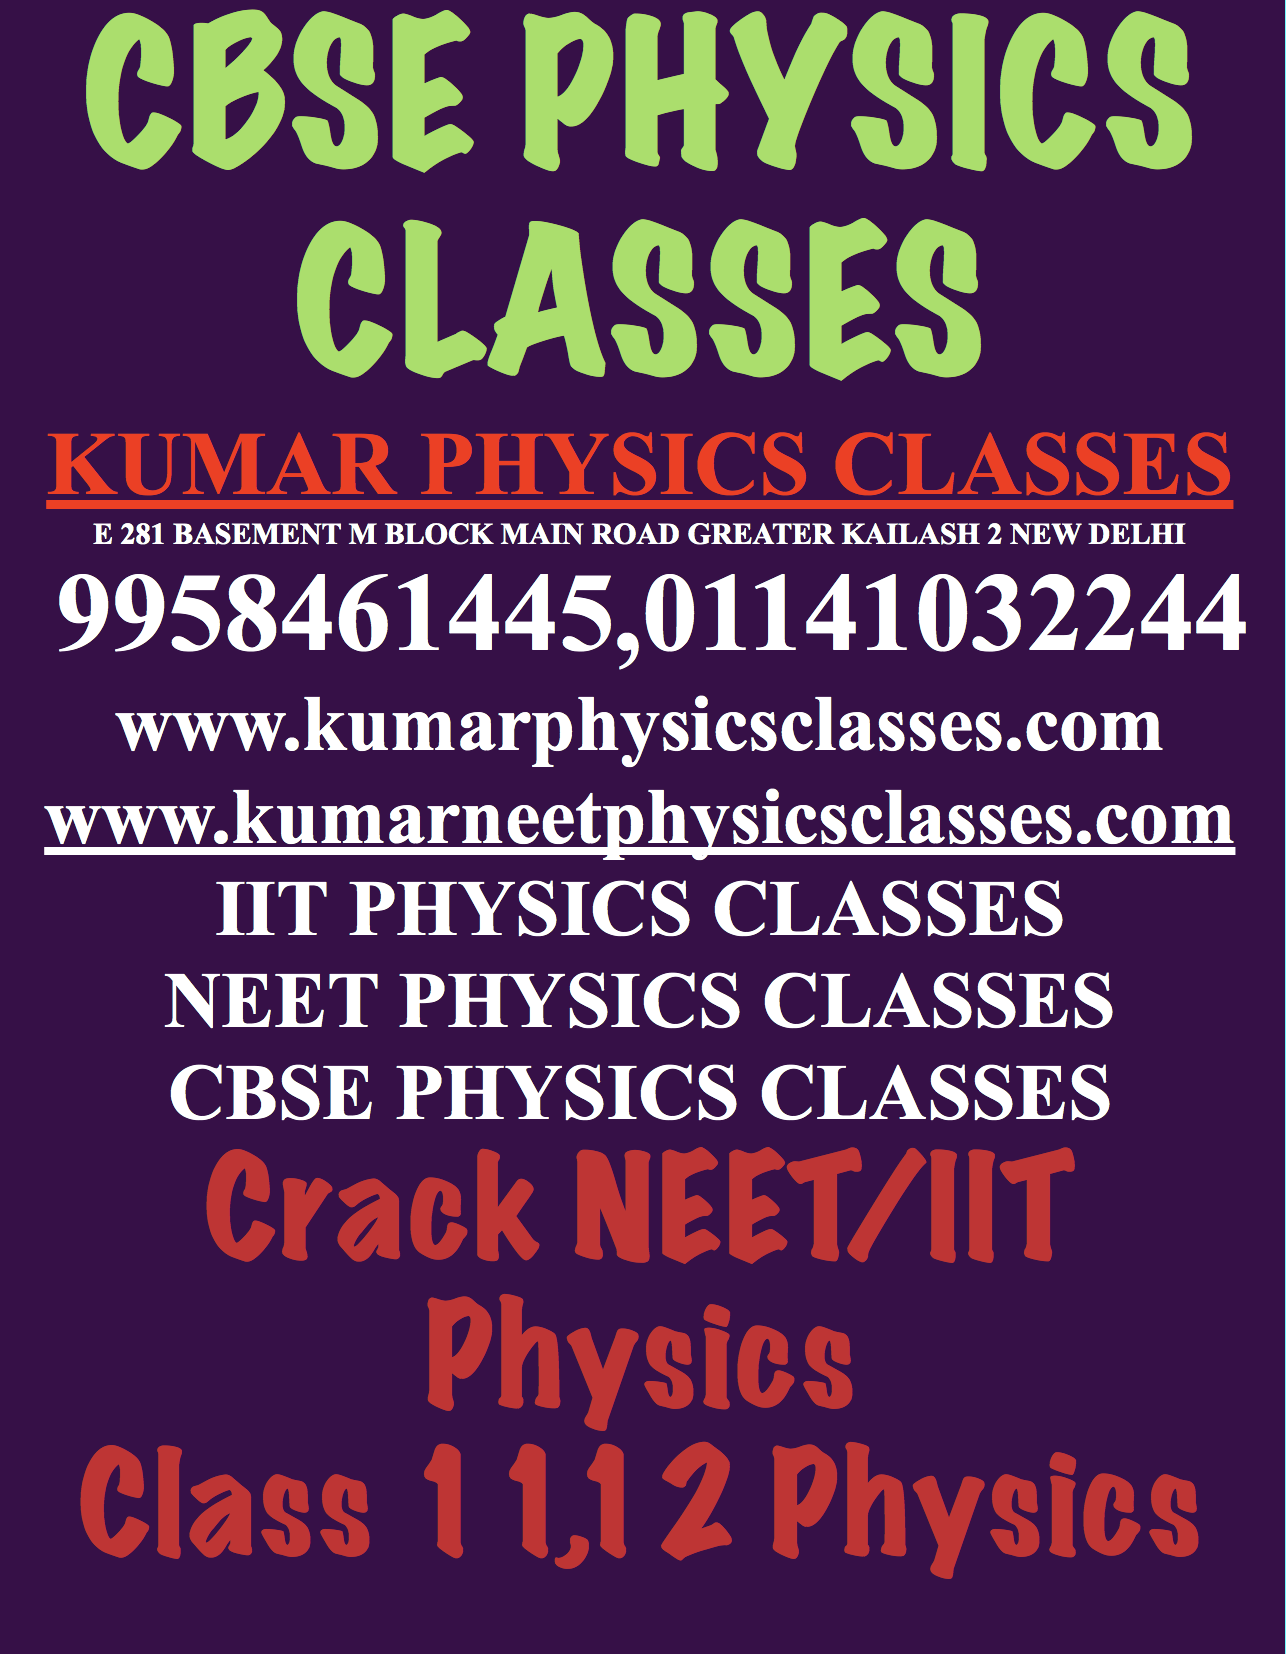 Do At least 50 physics numerical a day that will create a subject awareness and will add to your physics experience.
After understanding the physics theory by your physics tutor or school physics teacher, you are aware of basic physics concepts then start doing many physics questions then you realise the idea of increasing phenomenon of physics in yourself.
If you stuck in one problem, then try to understand in and out of the question go in depth of that problem.
 After a specific time, you understand more concepts becomes clearer and feel relaxed.
Still, you are not getting it to call up Kumar sir; he will make you perfect in physics, Best Physics Tutor In Delhi.
When you start solving the physics problems then the concepts becomes, and you will feel comfortable in physics, no headache no fuss and will again come back to study physics and don't feel bored.
Contact Kumar Sir 9958461445
www.kumarphysicsclasses.com
www.kumarneetphysicsclasses.com
